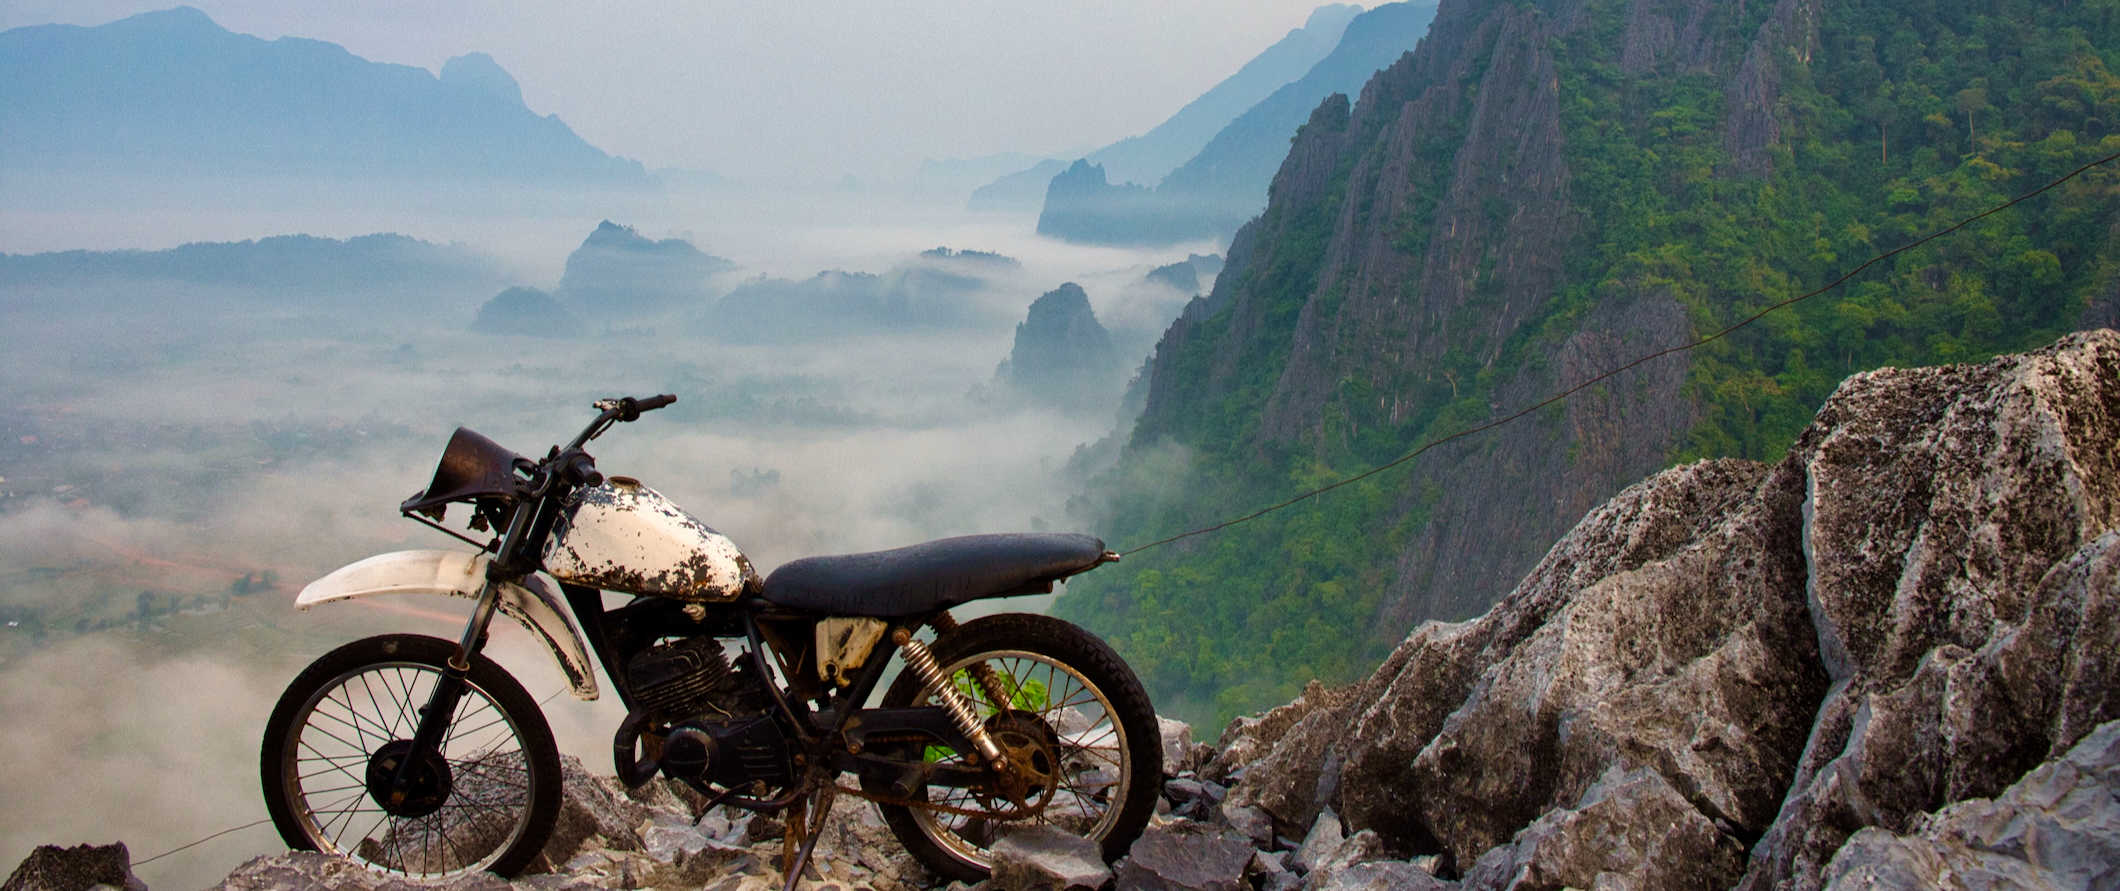 An old motorbike parked on a mountain overlooking the landscape near Vang Vieng, Laos